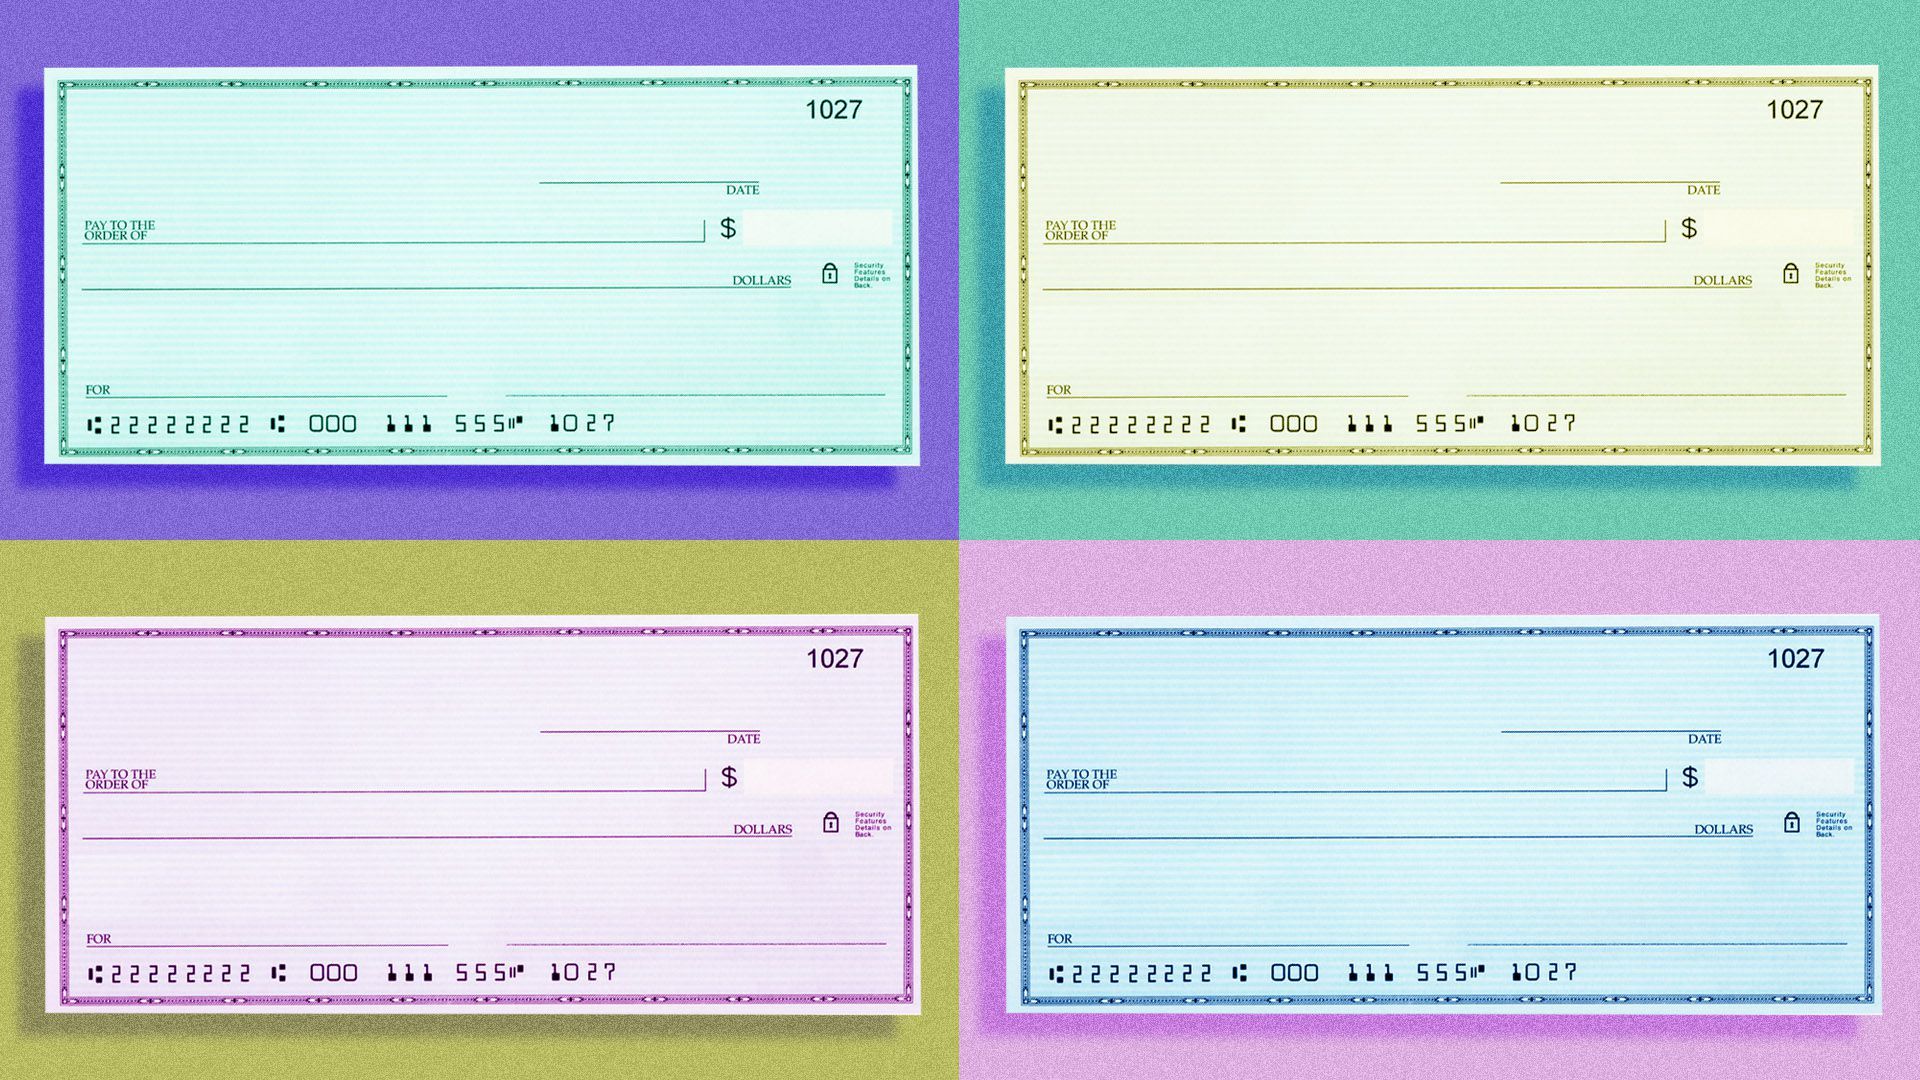 Illustration of four different colored checks on four different colored backgrounds